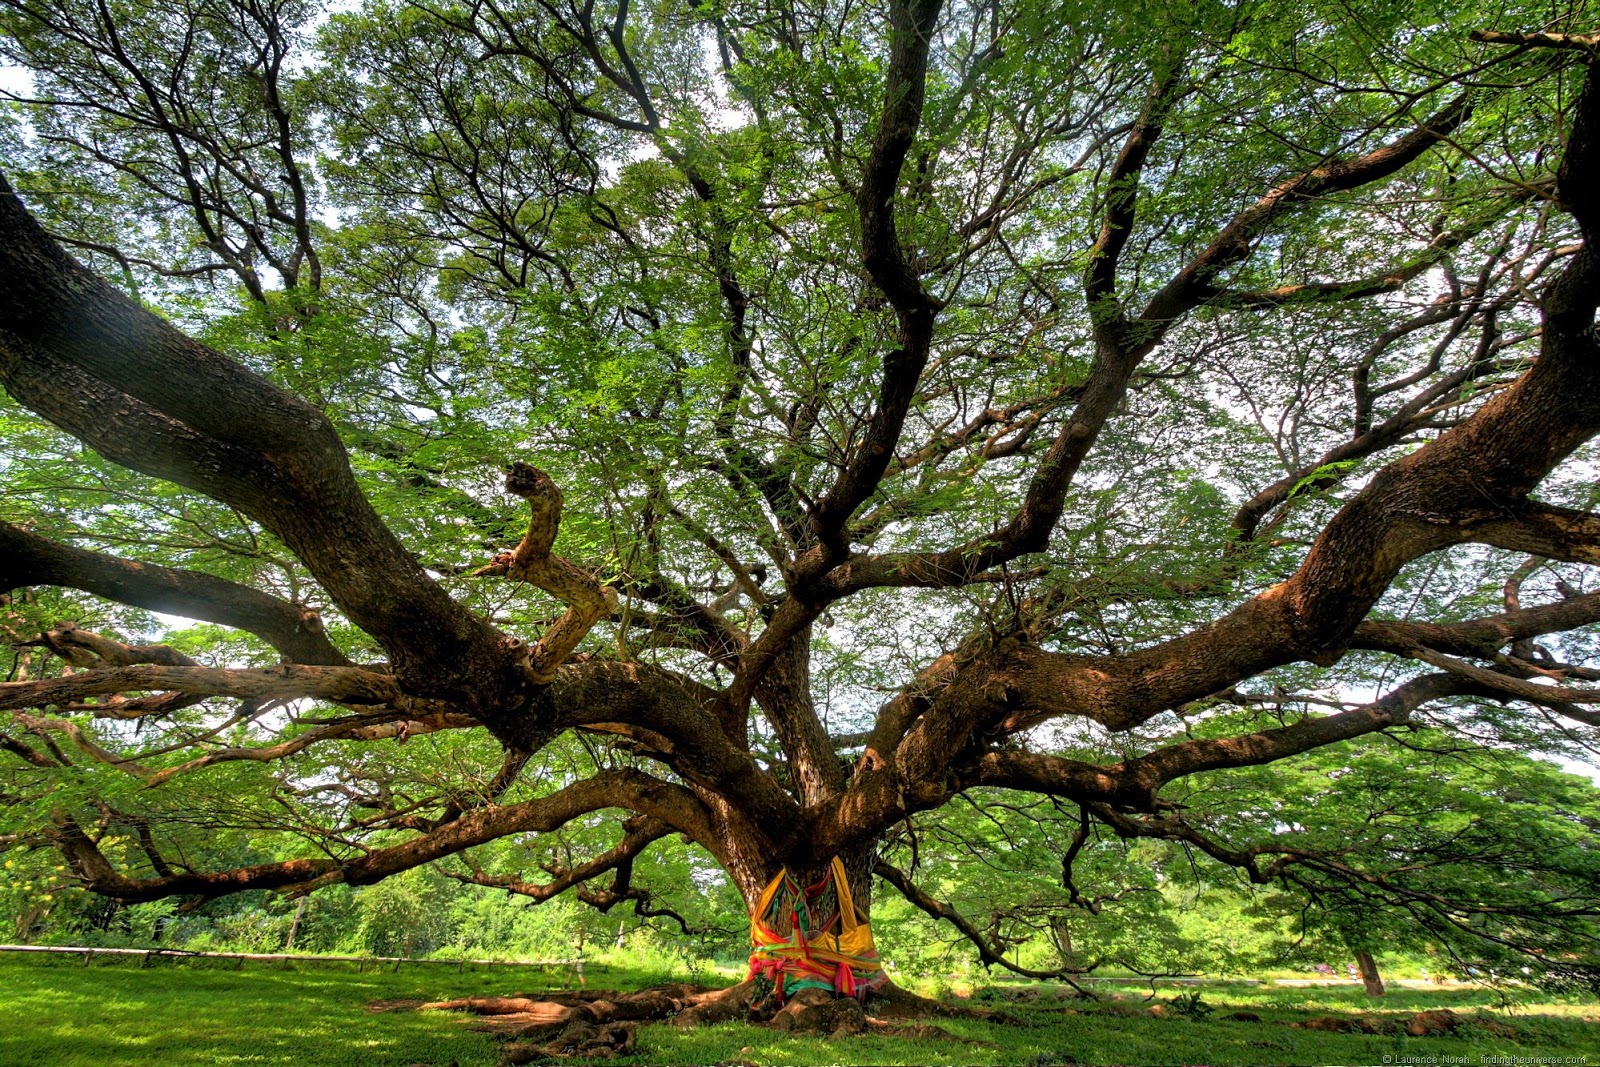 [Giant%2520tree%2520by%2520Laurence%2520of%2520findingtheuniverse.com%255B2%255D.jpg]